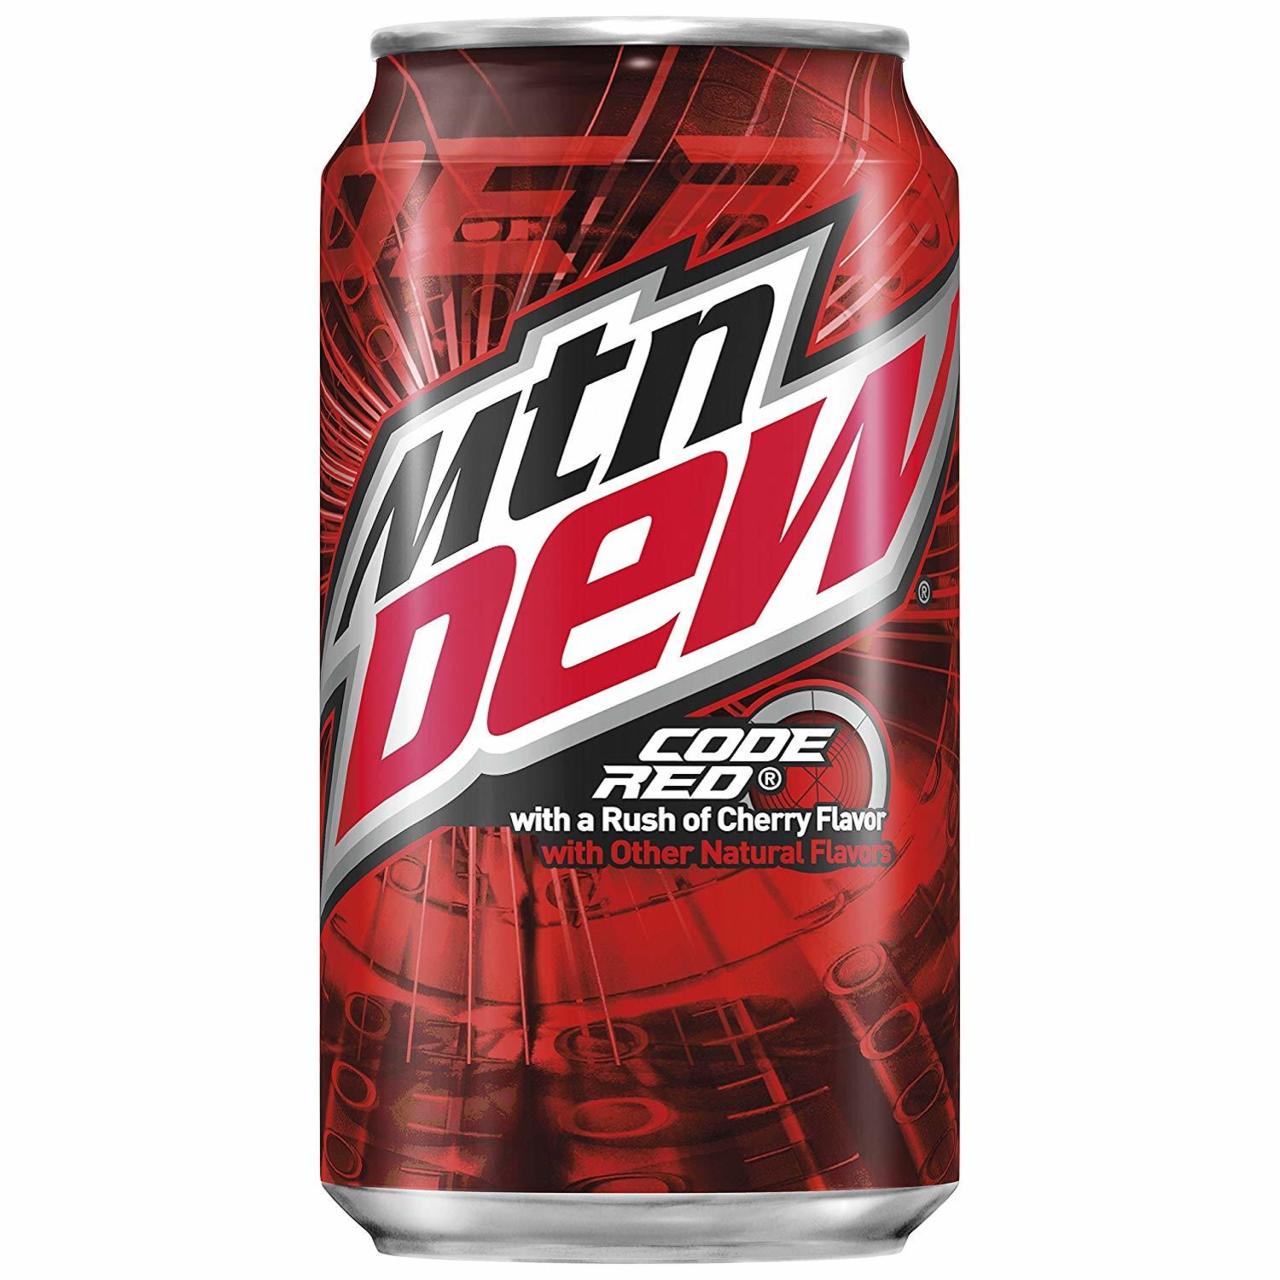 14. Mountain Dew Code Red